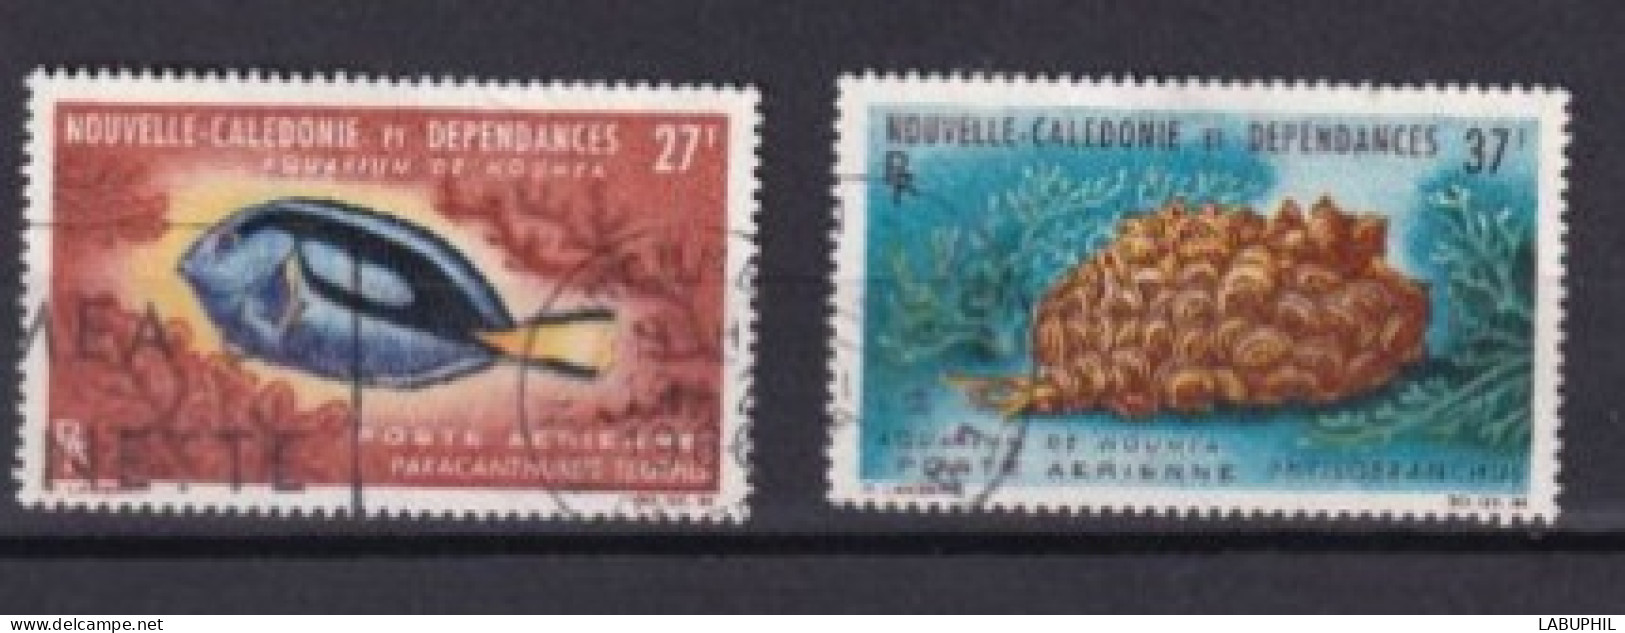 NOUVELLE CALEDONIE Dispersion D'une Collection Oblitéré Used  1965 Faune - Used Stamps